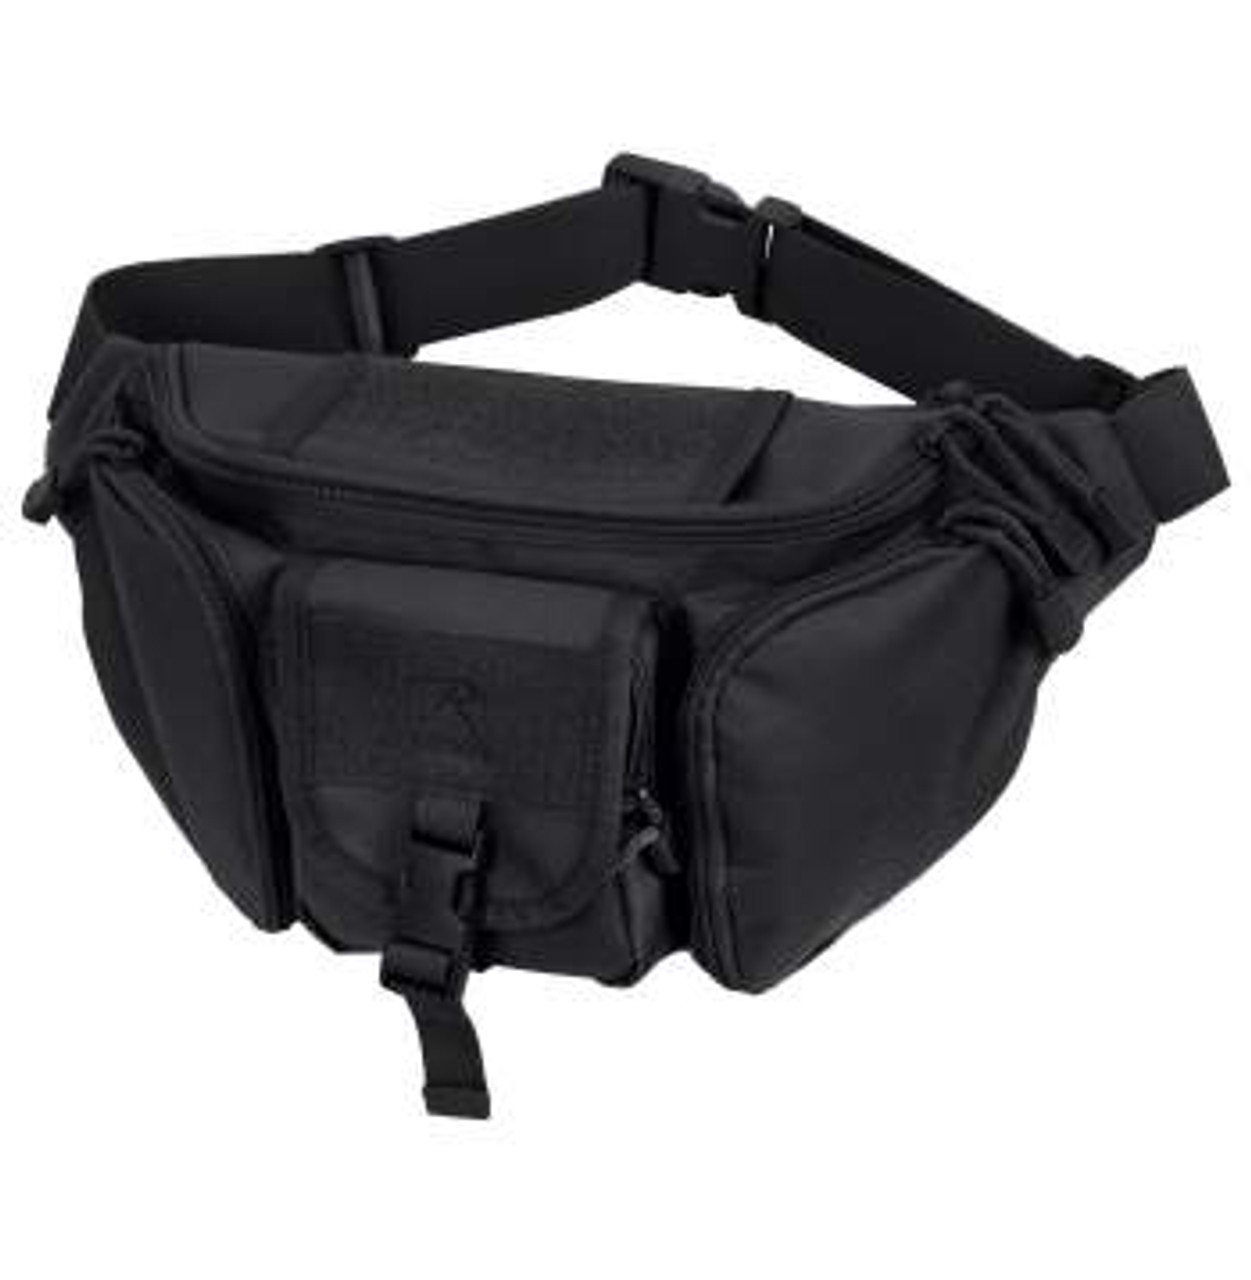 Rothco Tactical Concealed Carry Waist Pack, Black